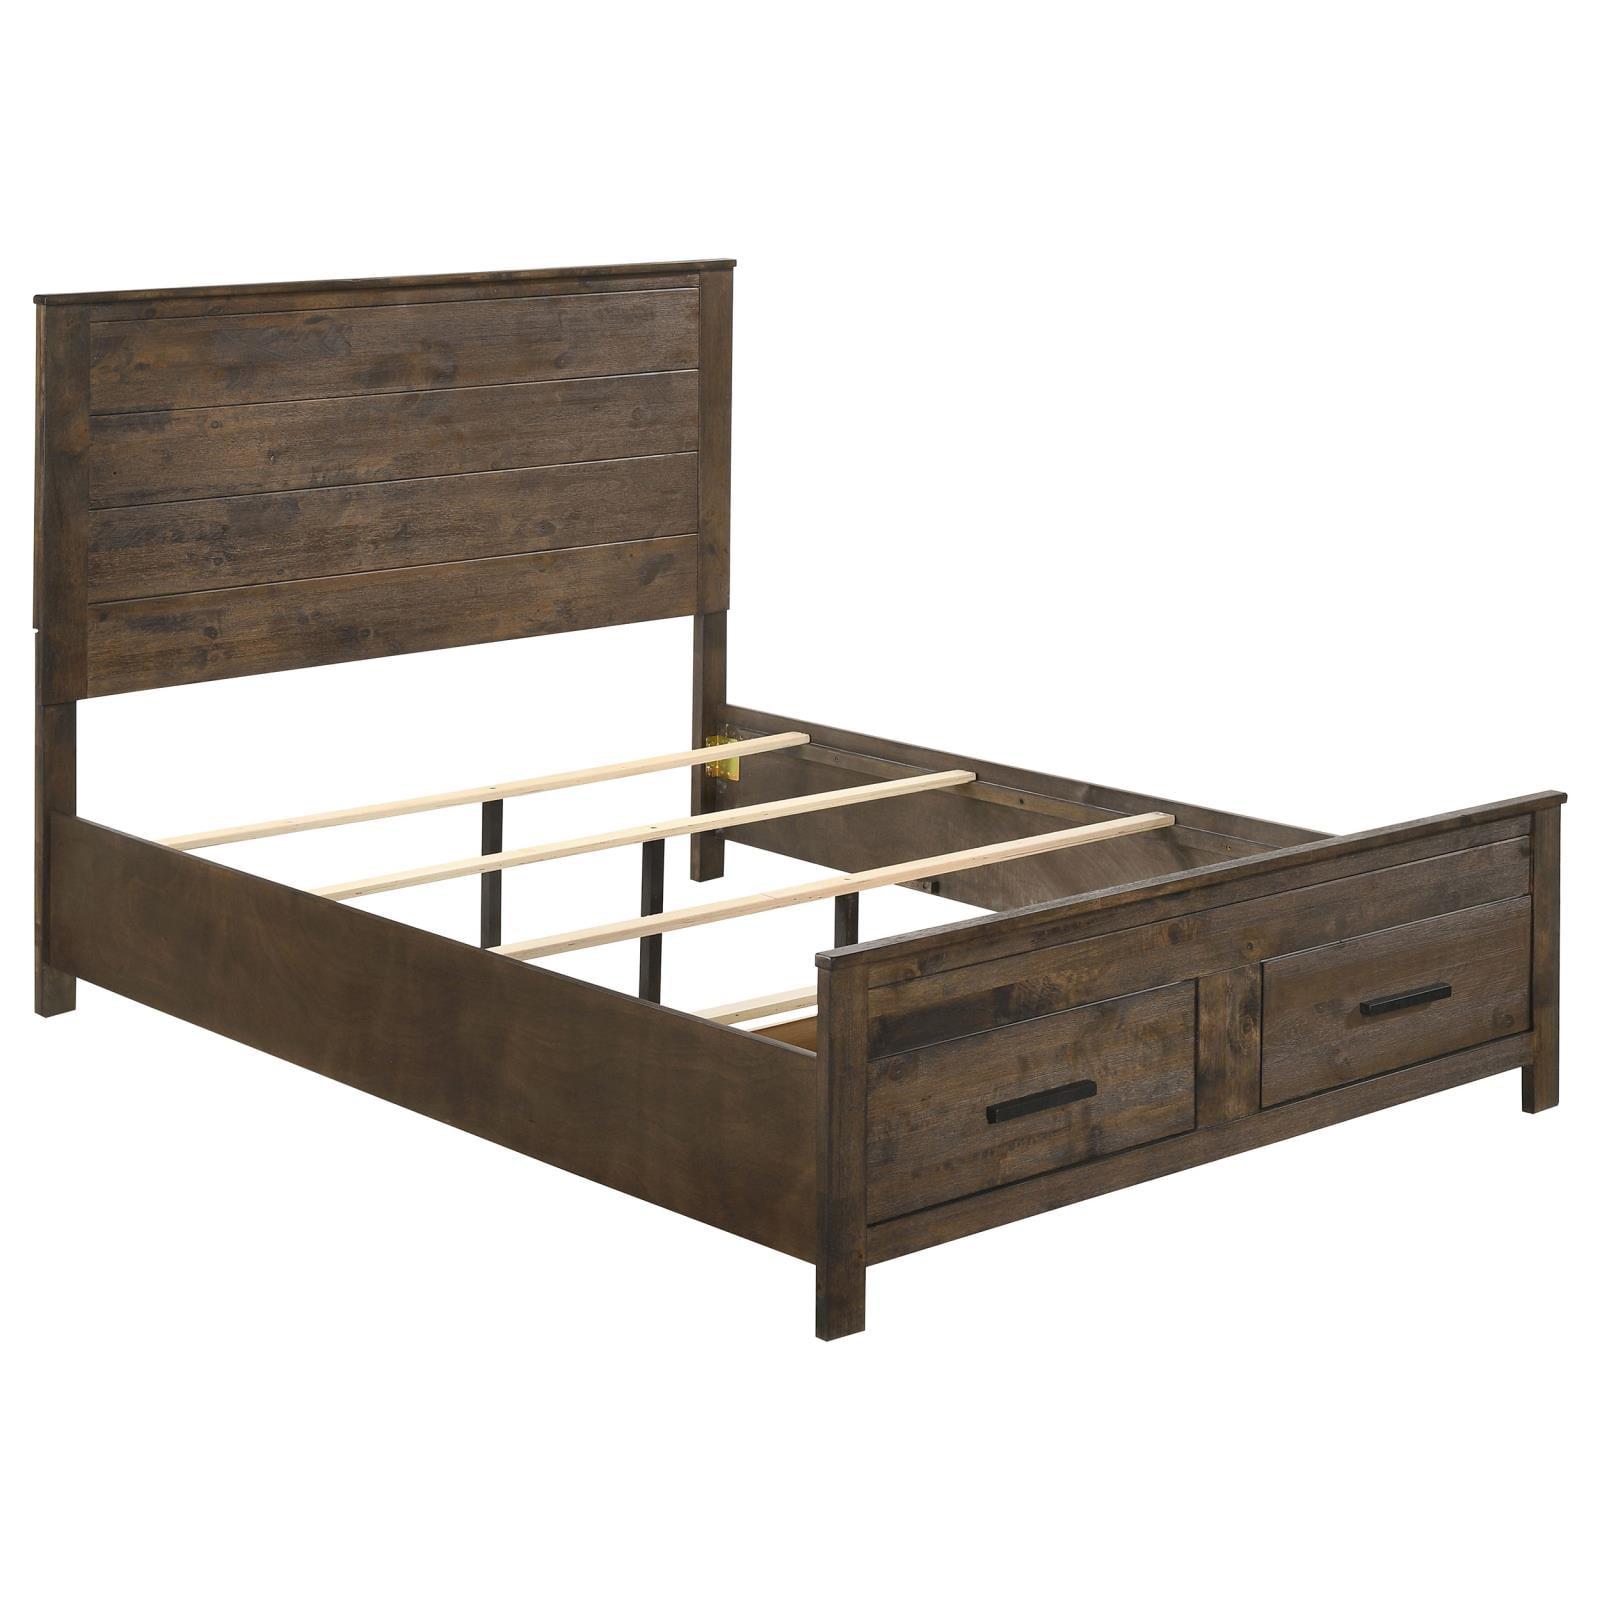 Countryside Allure Queen Storage Bed with Rustic Golden Brown Finish